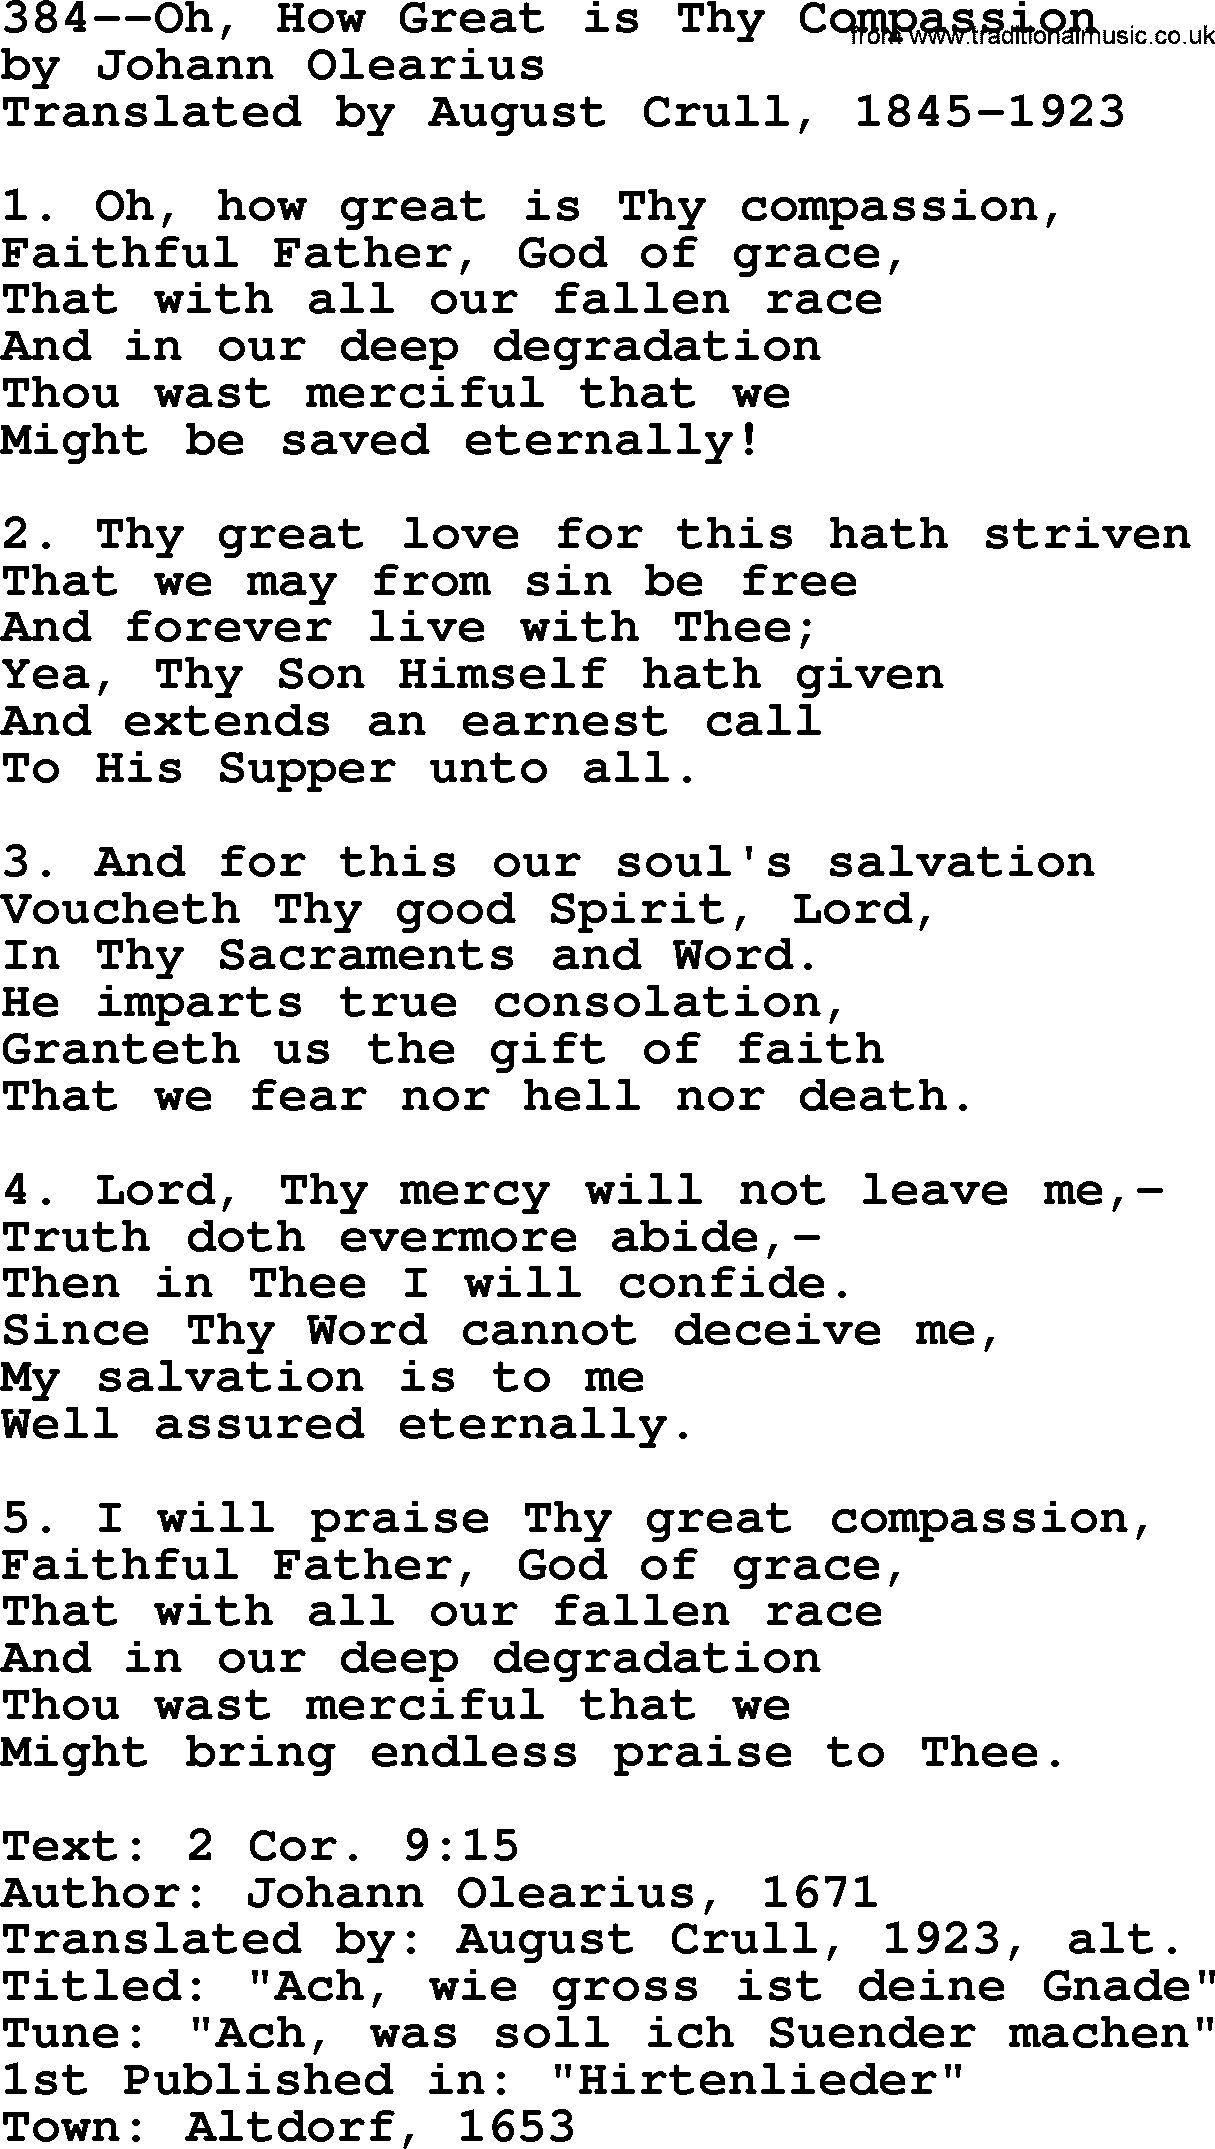 Lutheran Hymn: 384--Oh, How Great is Thy Compassion.txt lyrics with PDF